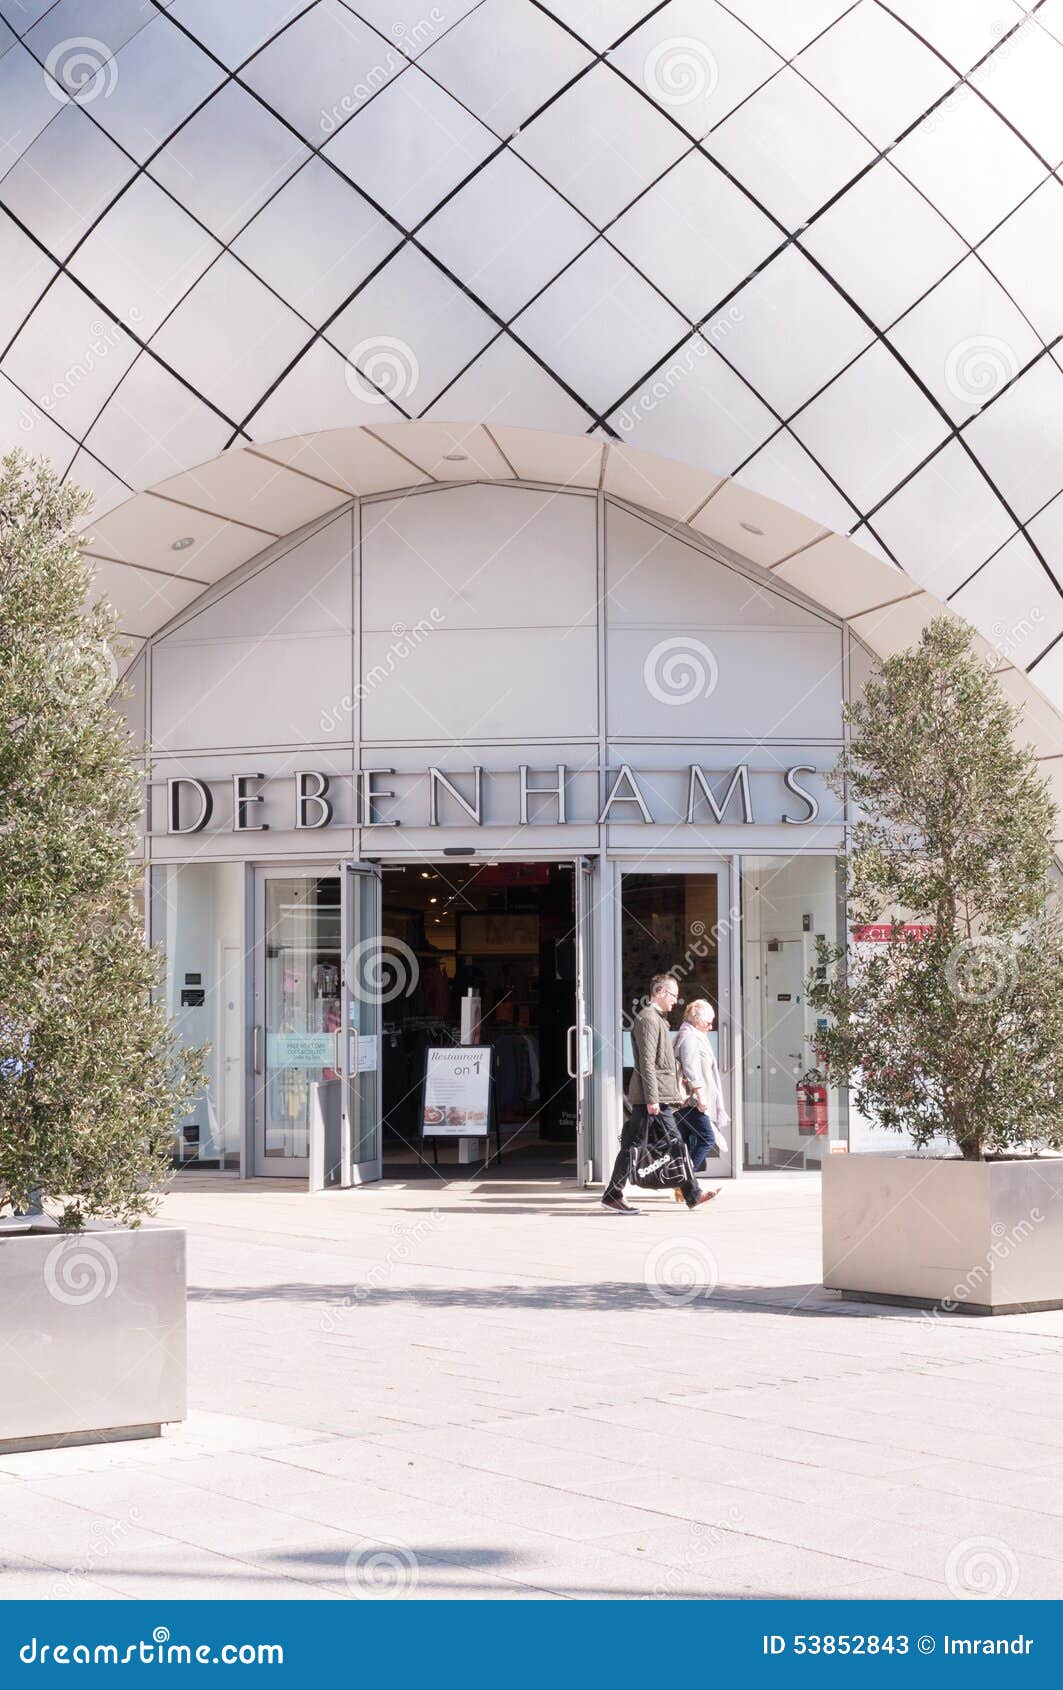 ... doors of the Debenhams department store in the Arc shopping complex